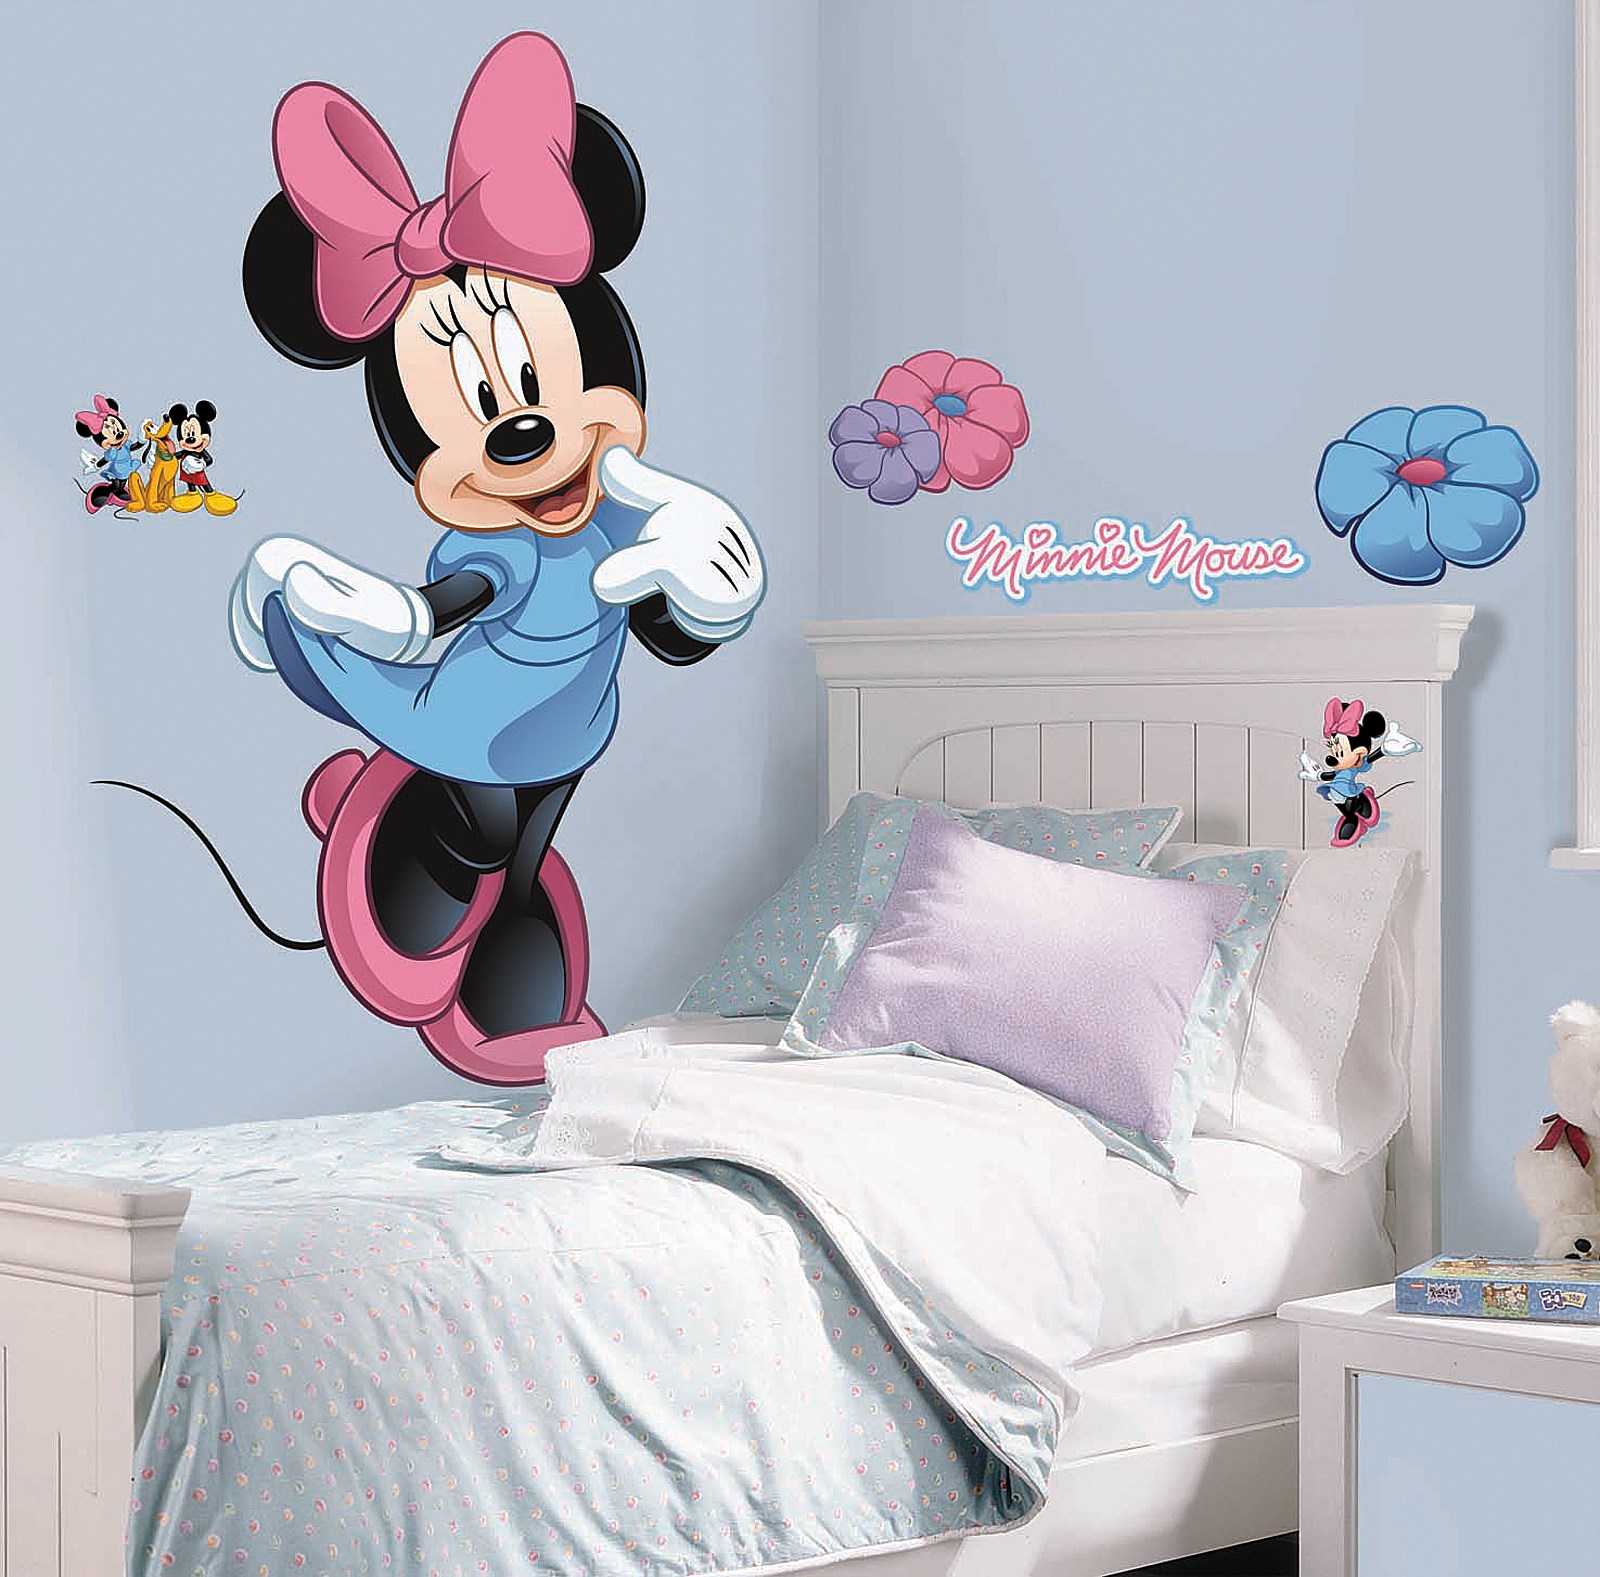 Disney Minnie Mouse Giant Wall Decal